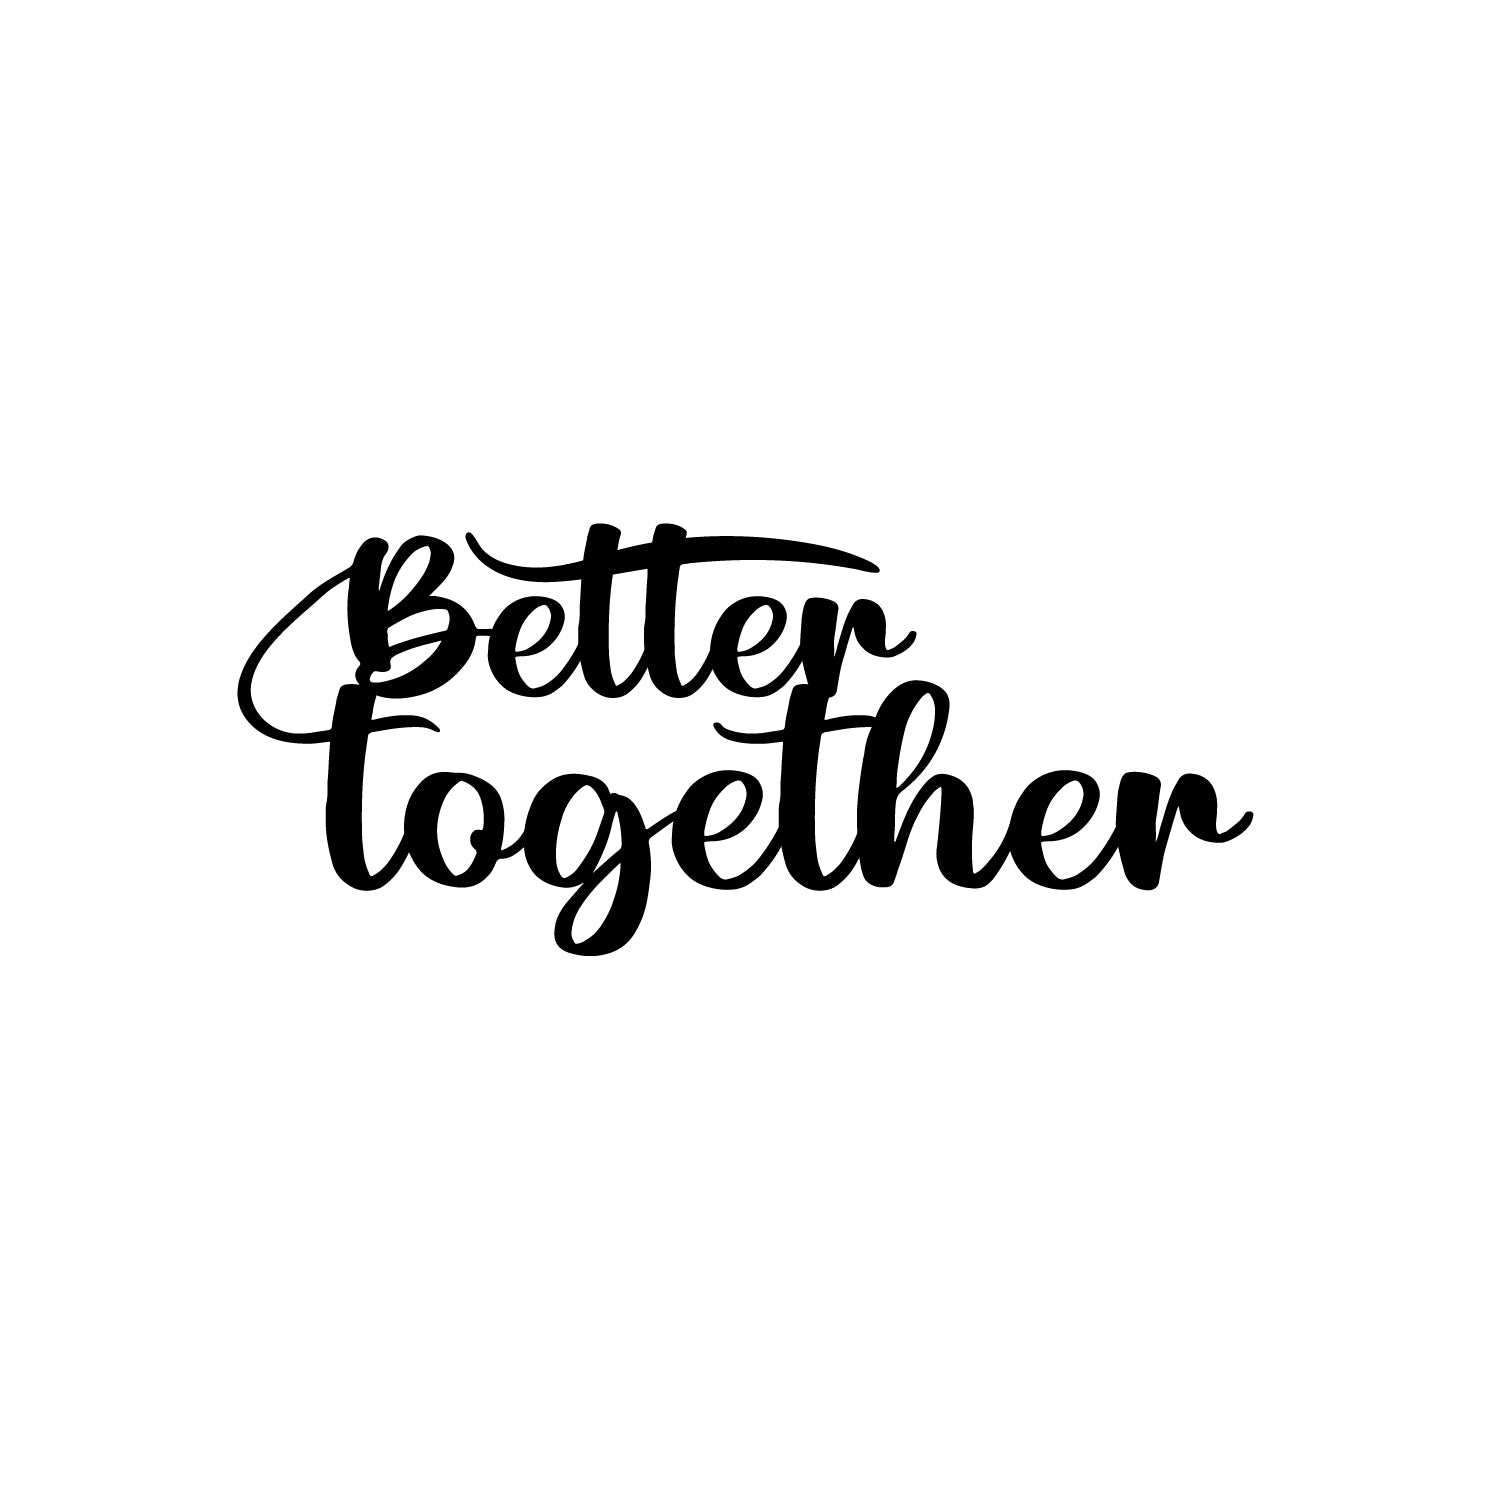 Better Together Black Engineered Wood Wall Art Cutout, Ready To Hang Home Decor